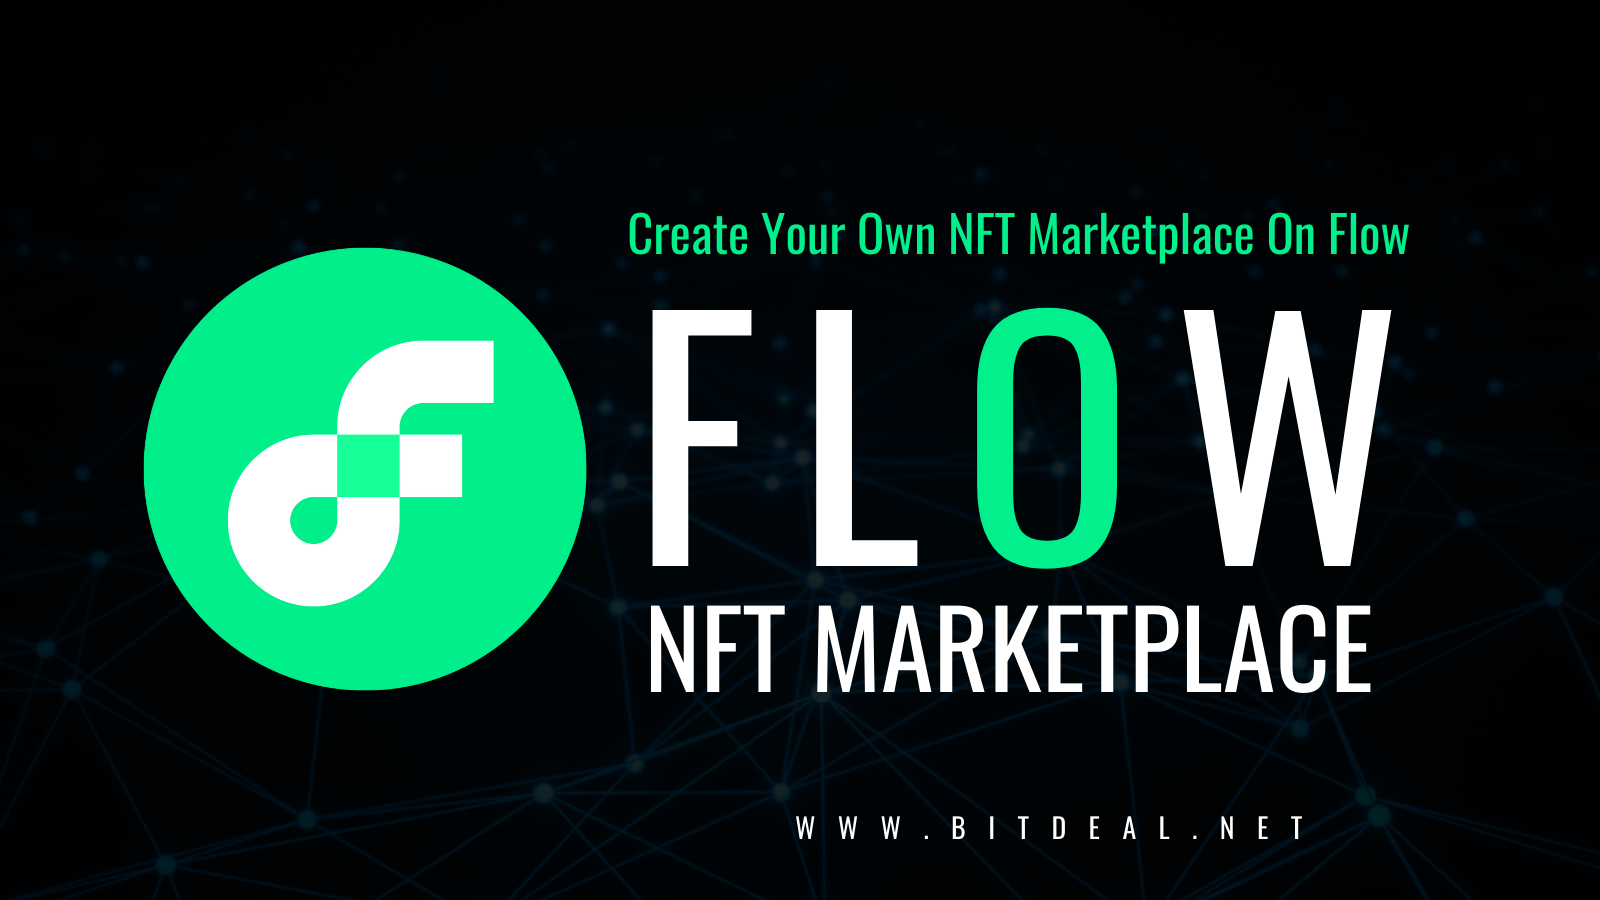 Article about How To start a NFT Marketplace on Flow Blockchain 